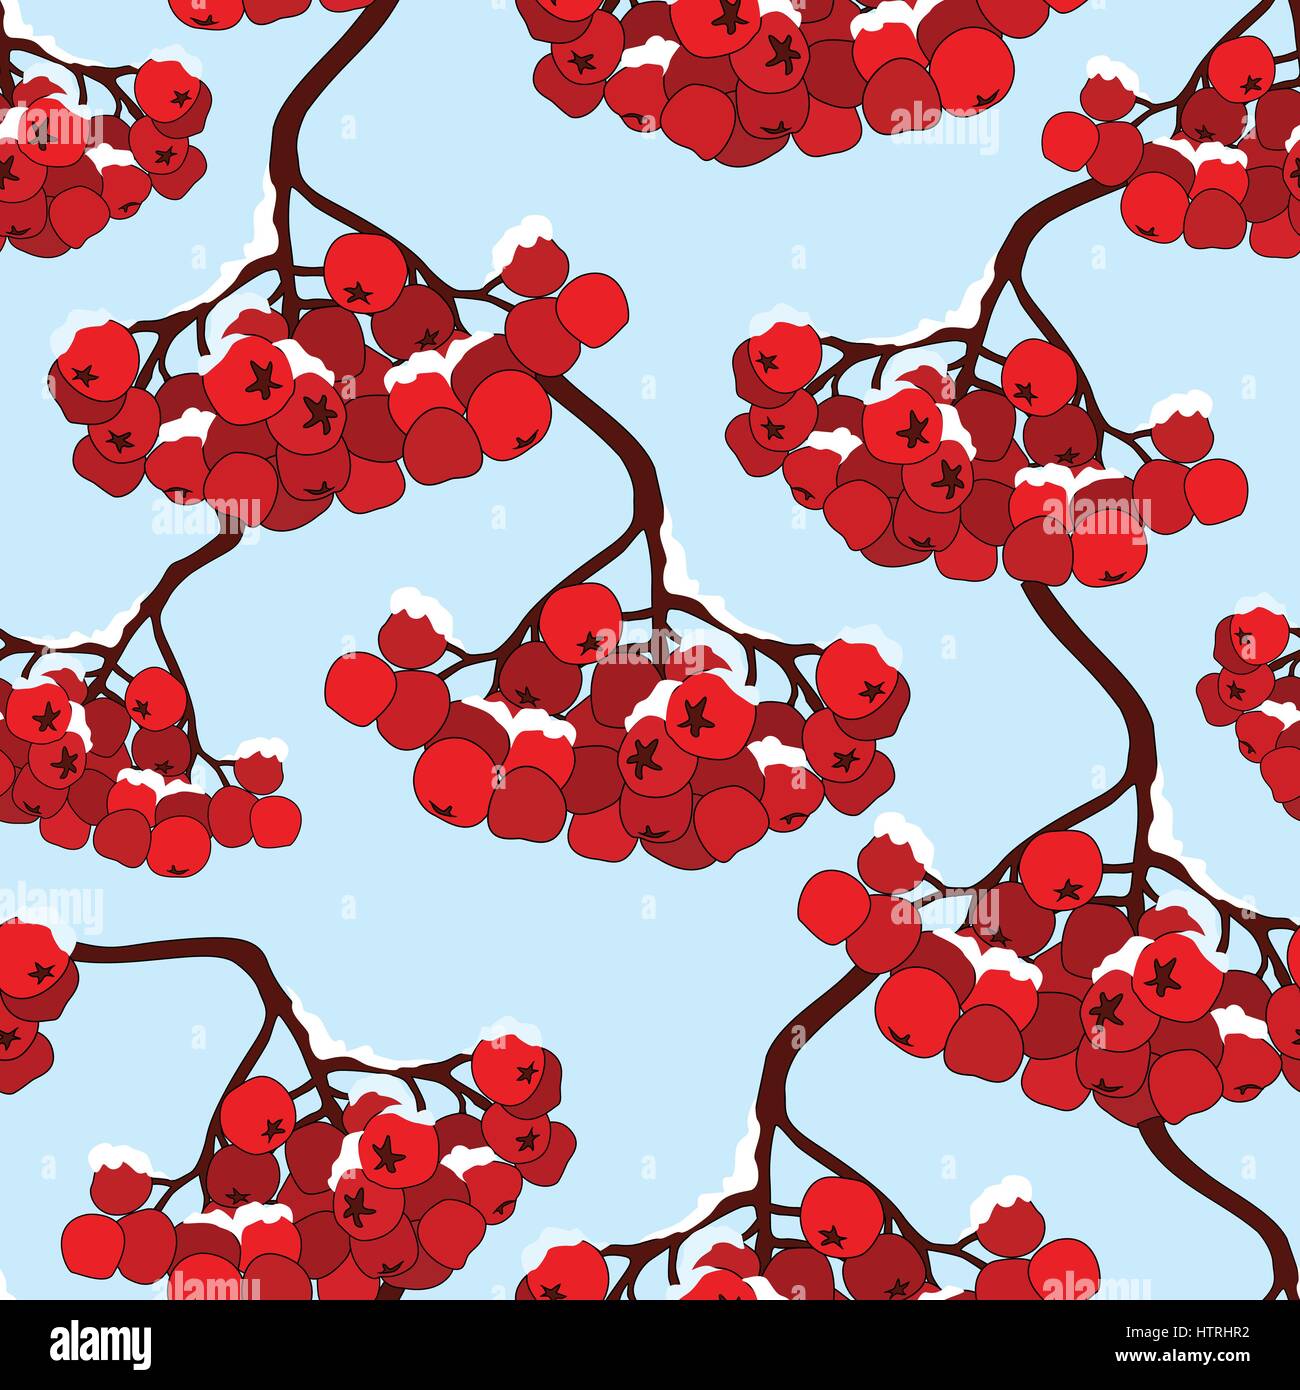 Floral seamless pattern. Winter holiday background, rowan berry branch Stock Vector